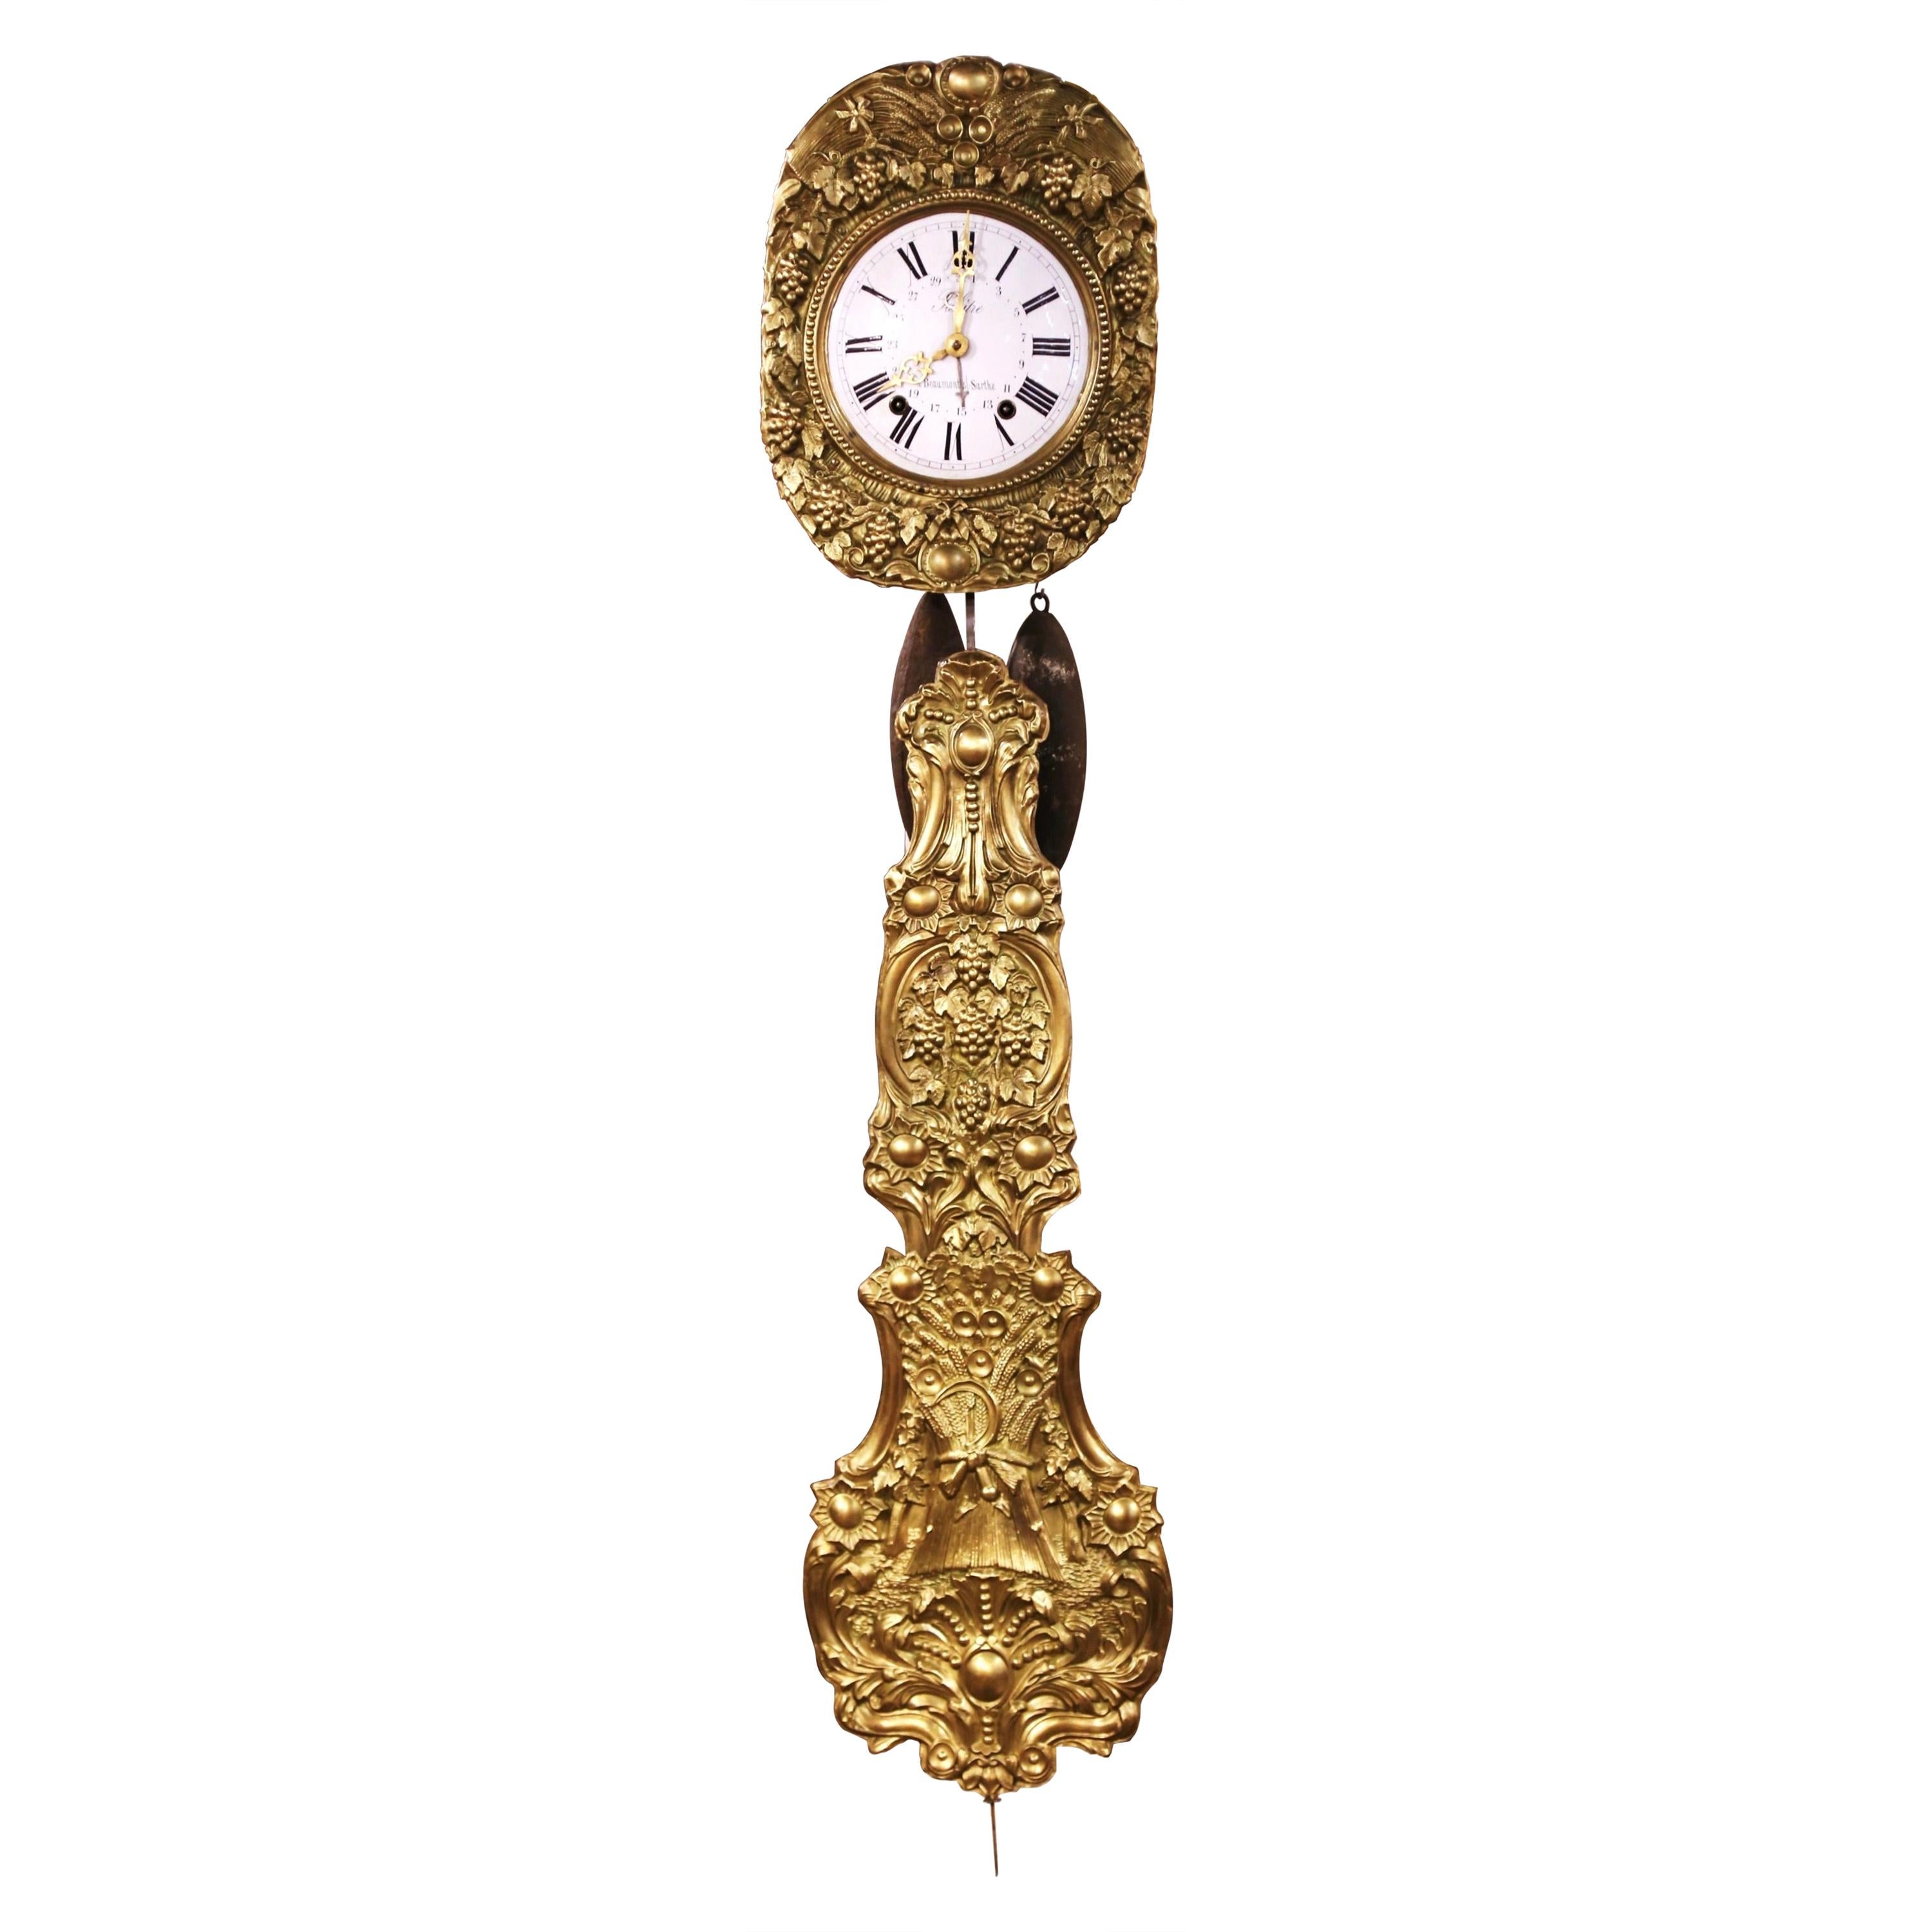 19th Century French Repousse Brass Comtoise Wall Clock with Grape & Vine Motifs